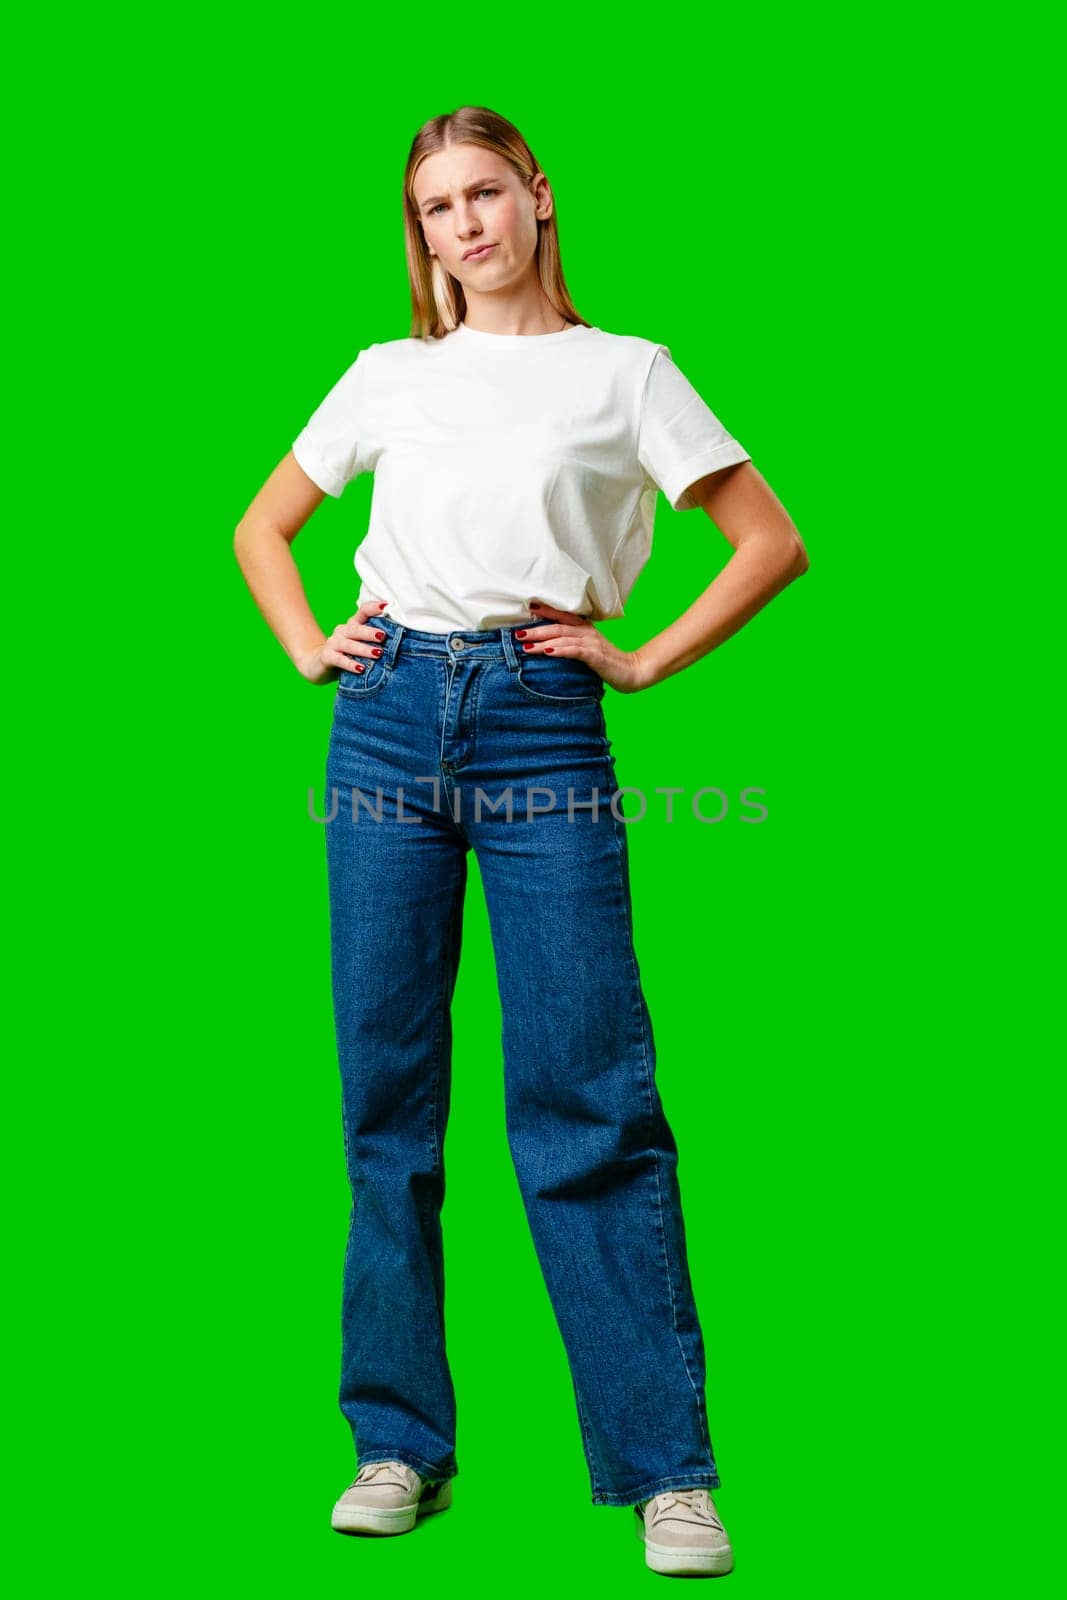 Young Woman With Pursed Lips Expressing Skepticism Against Green Screen Background by Fabrikasimf